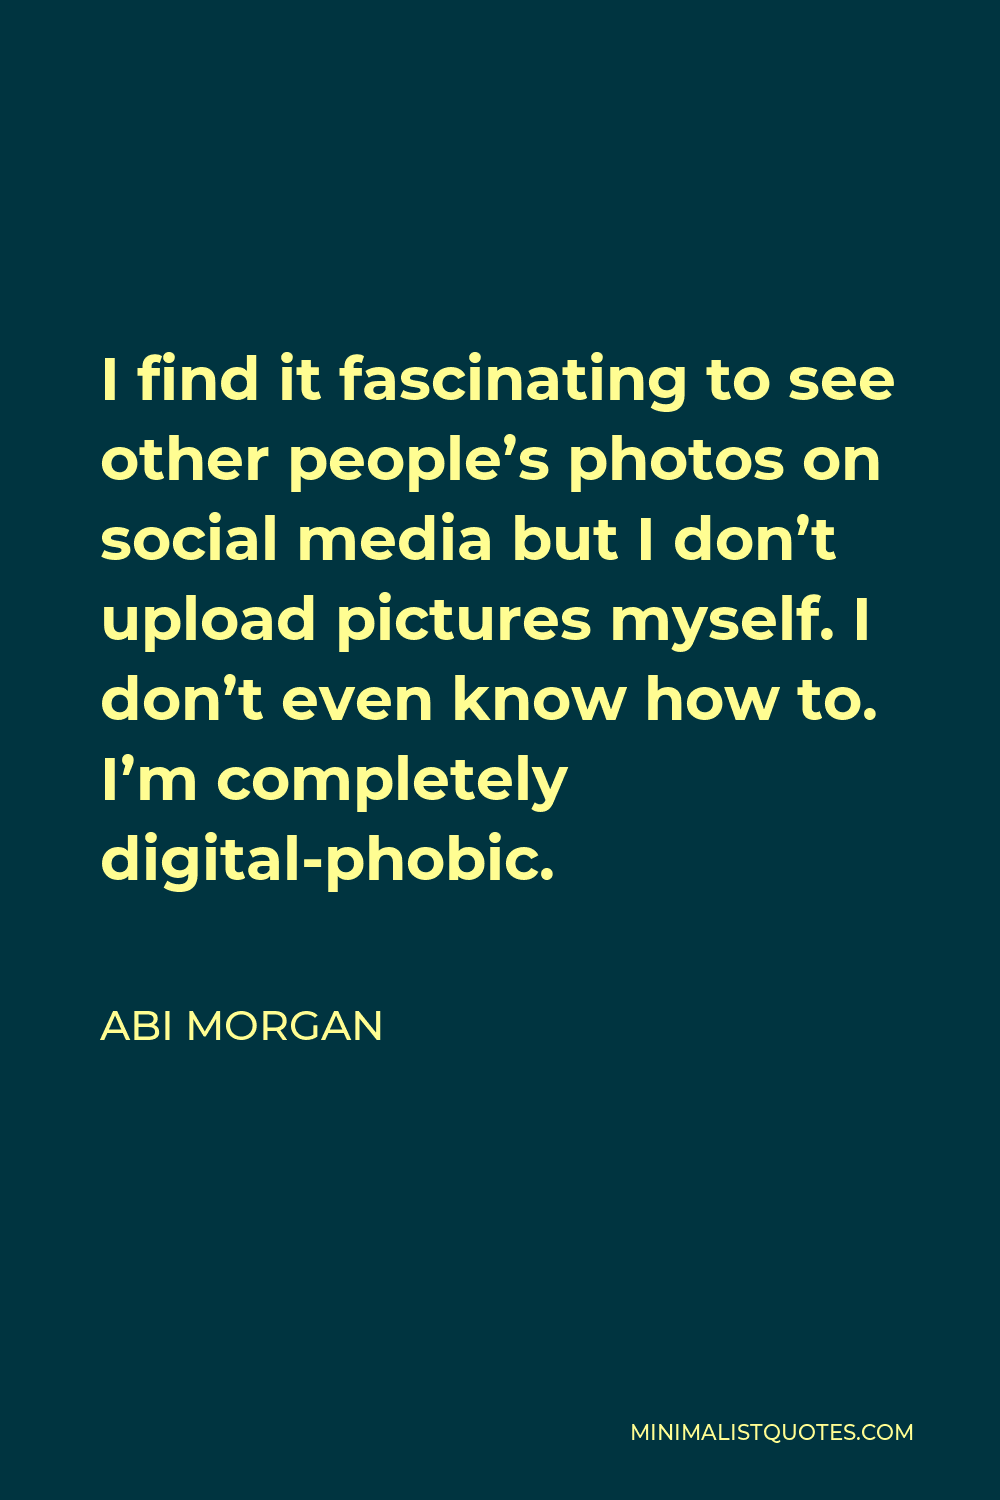 Abi Morgan Quote - I find it fascinating to see other people’s photos on social media but I don’t upload pictures myself. I don’t even know how to. I’m completely digital-phobic.